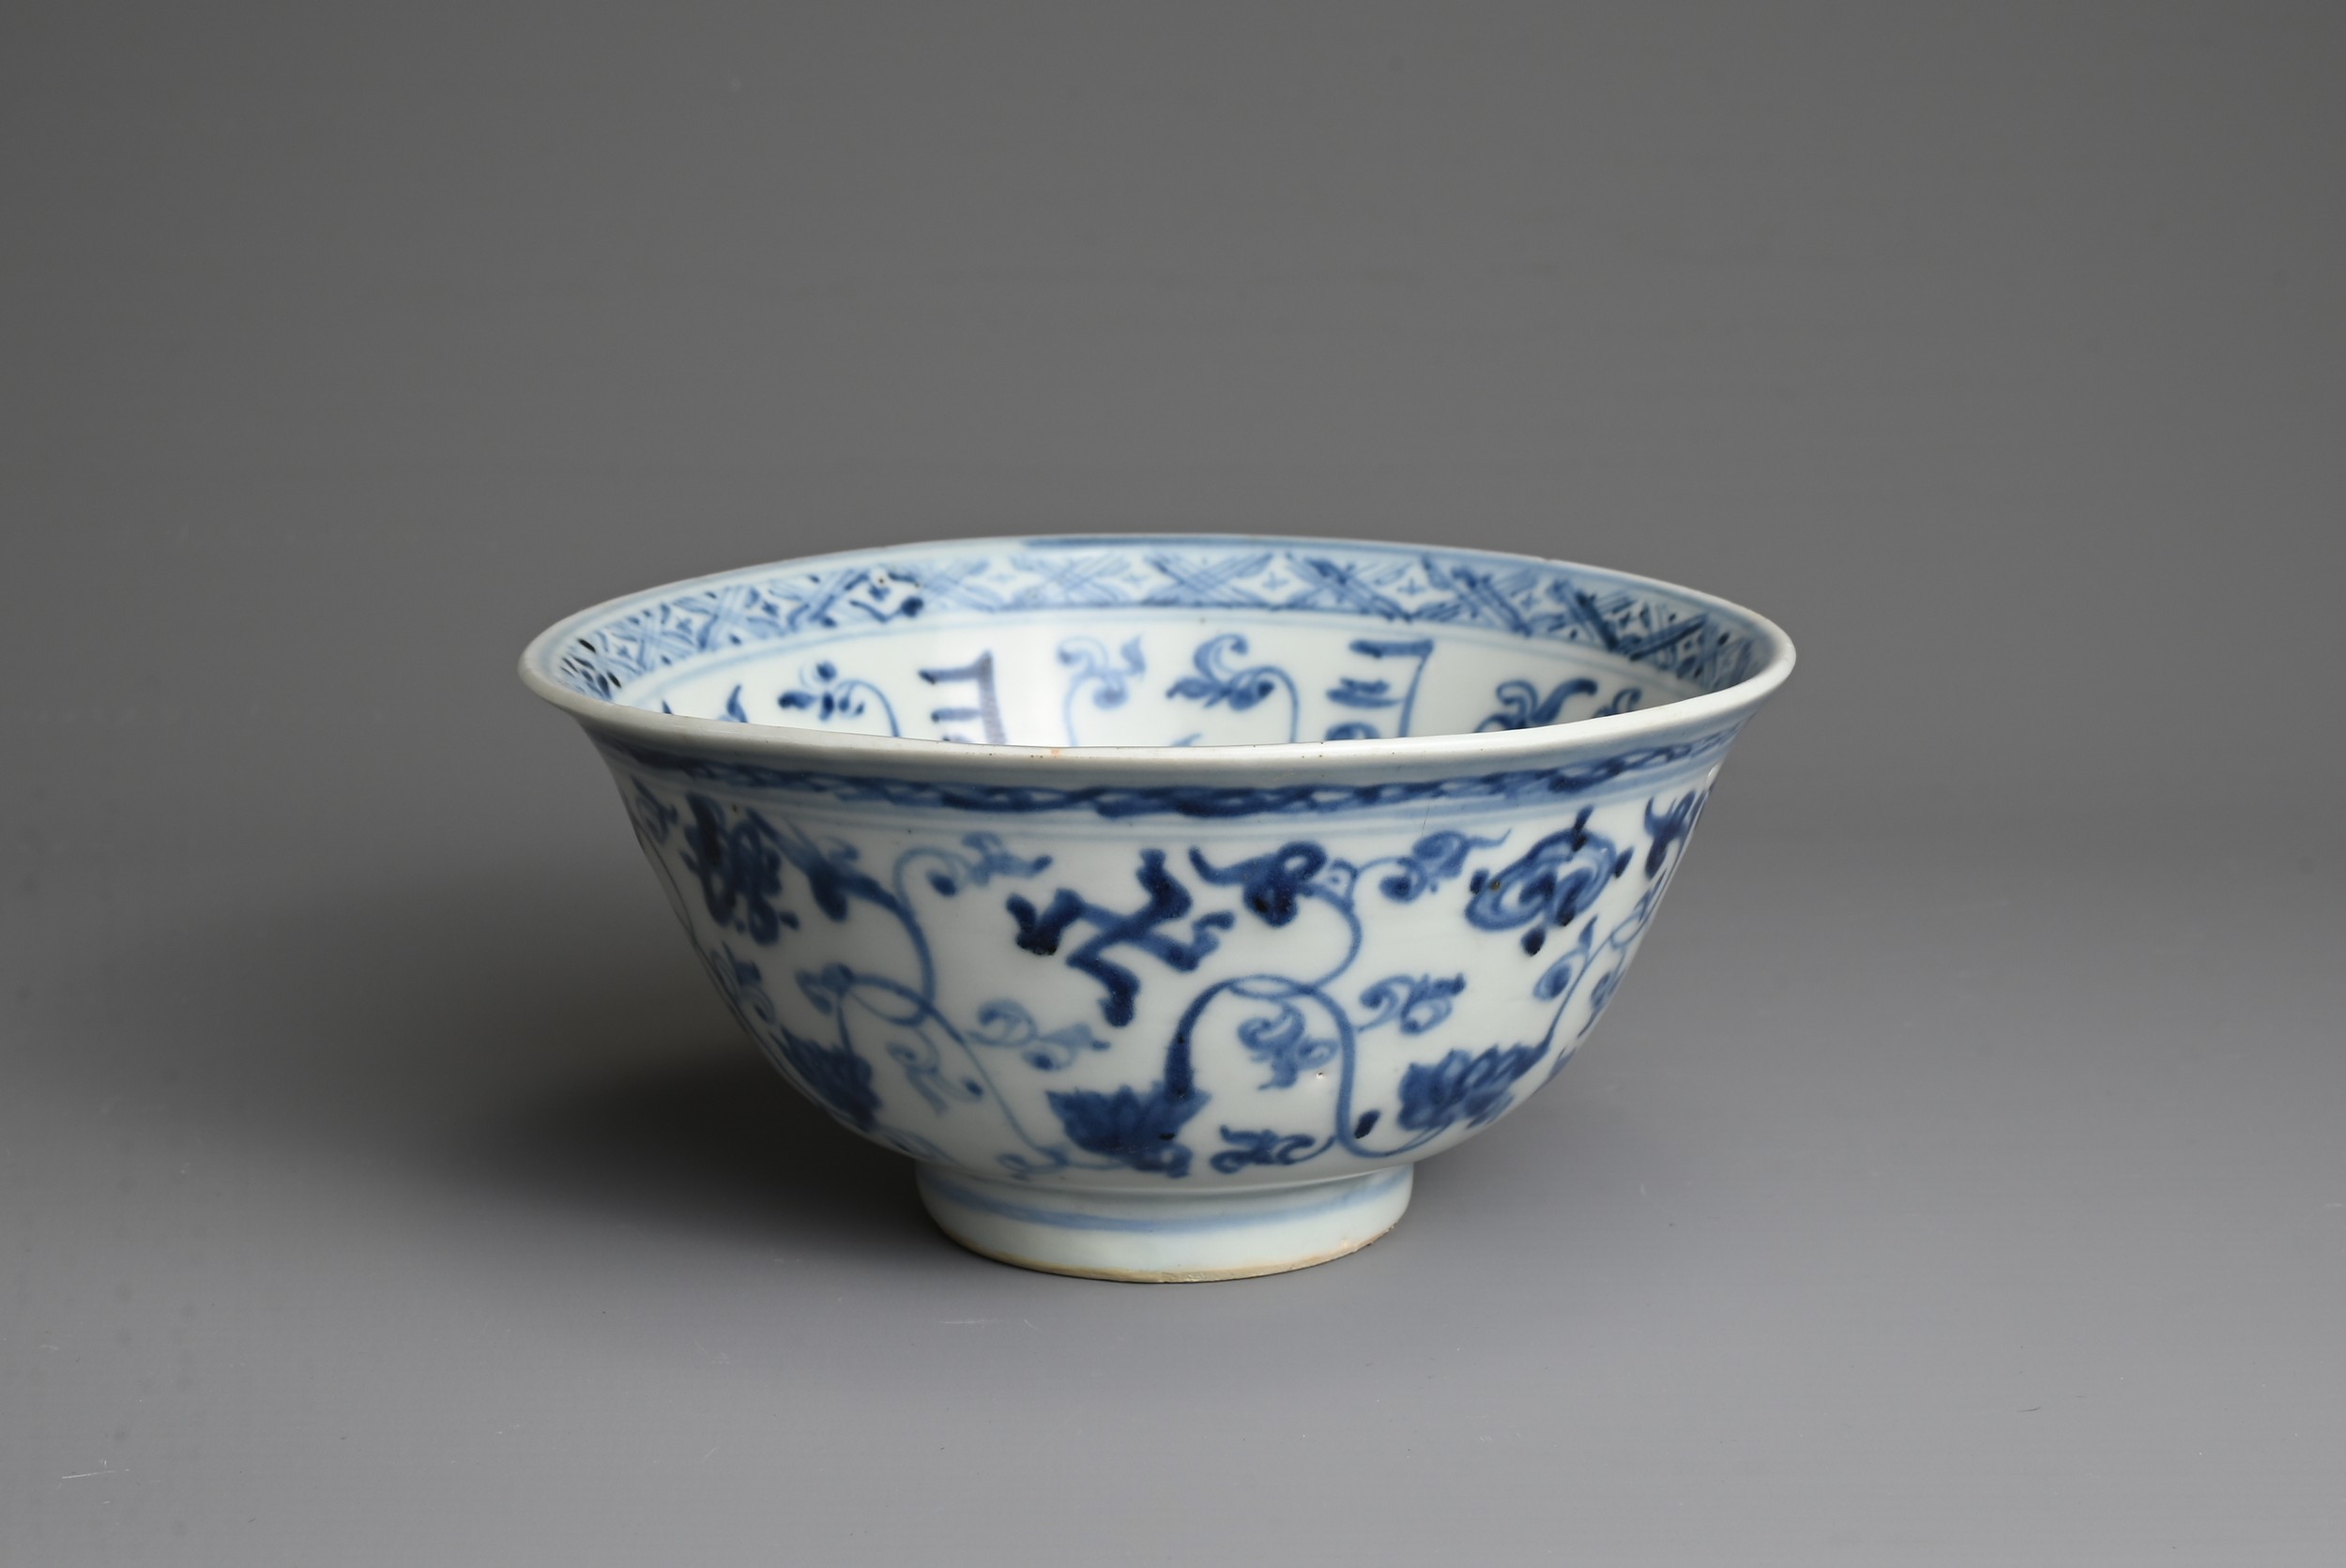 A CHINESE BLUE AND WHITE PORCELAIN BOWL, MING DYNASTY. Decorated with lotus scrolls and Buddhist